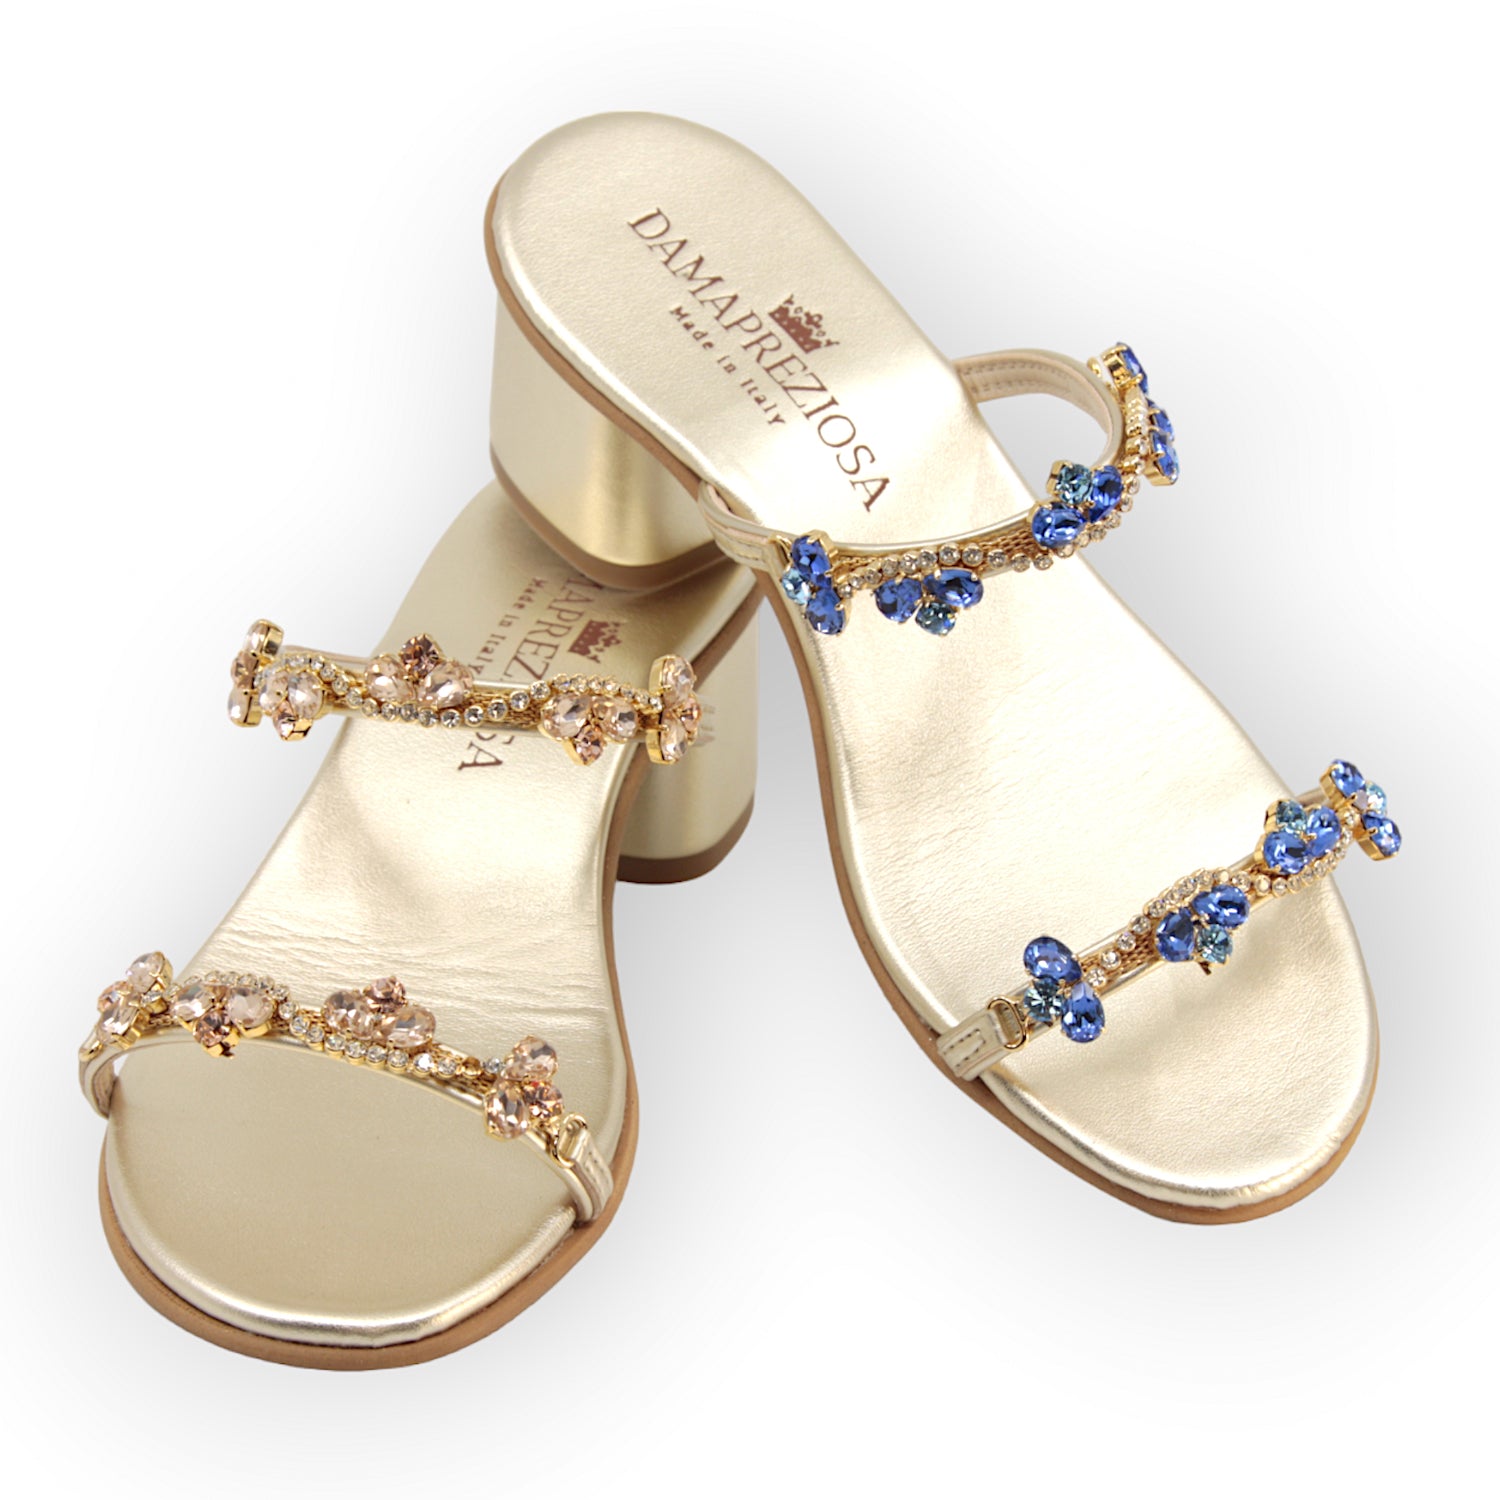 Kate Gold Sandal In Blue Shades Crystals